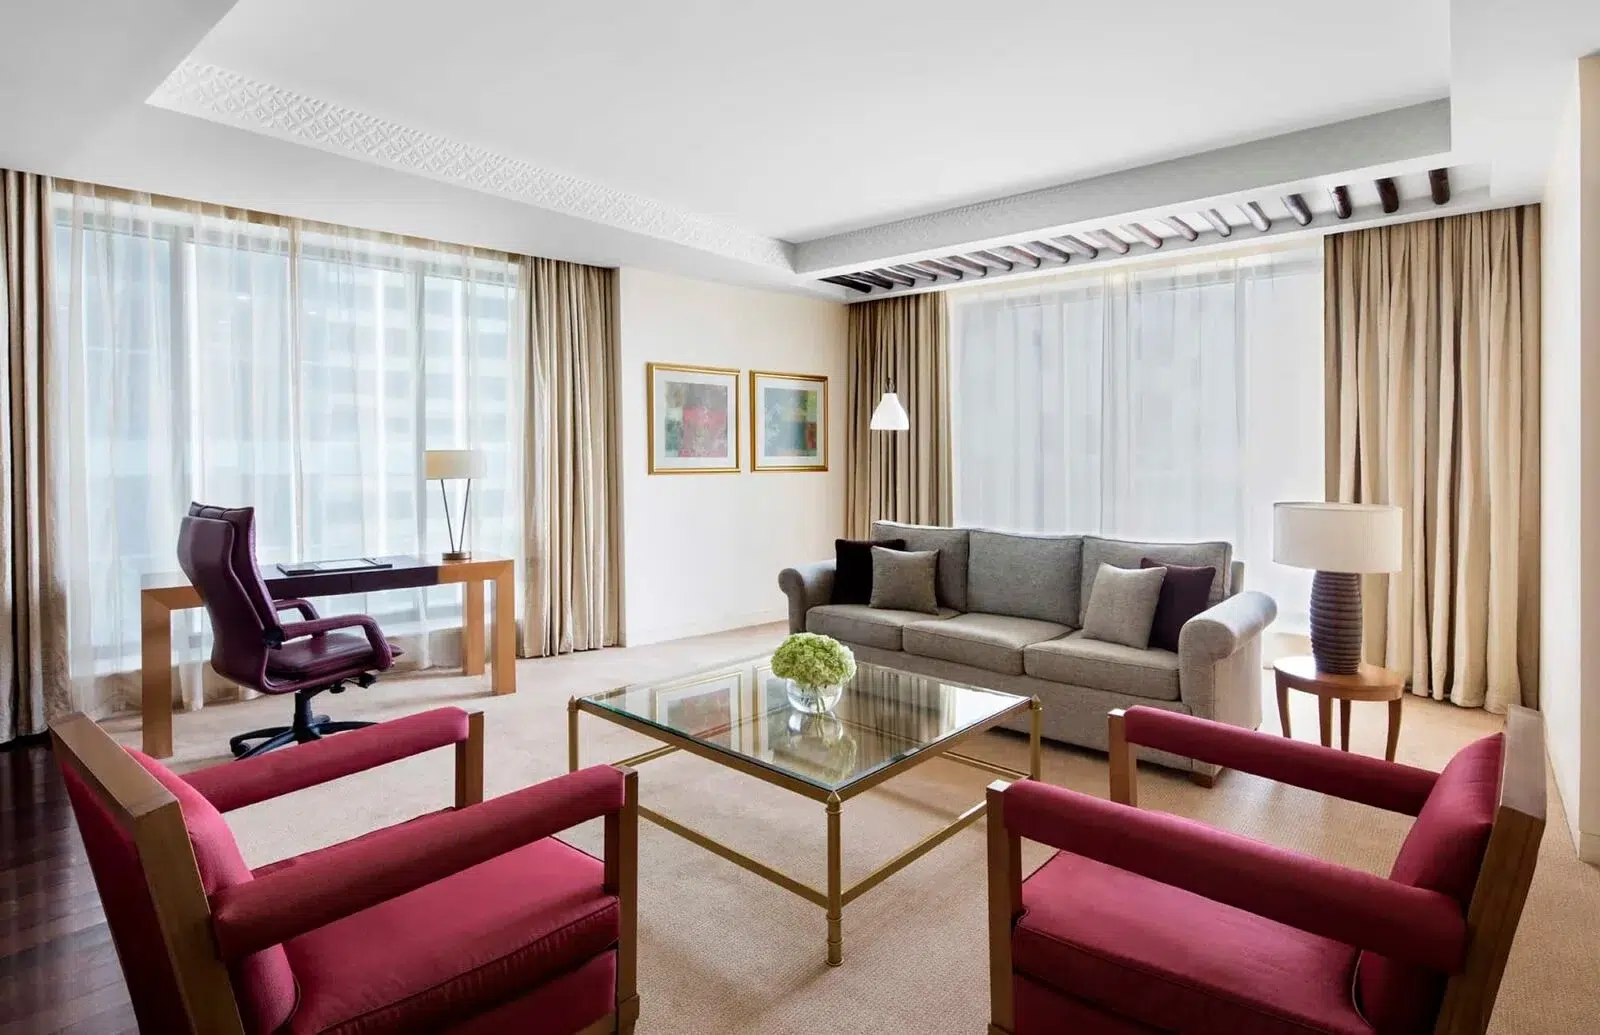 One bedroom apartment in Dubai with lots of natural light and space to relax, The H Dubai